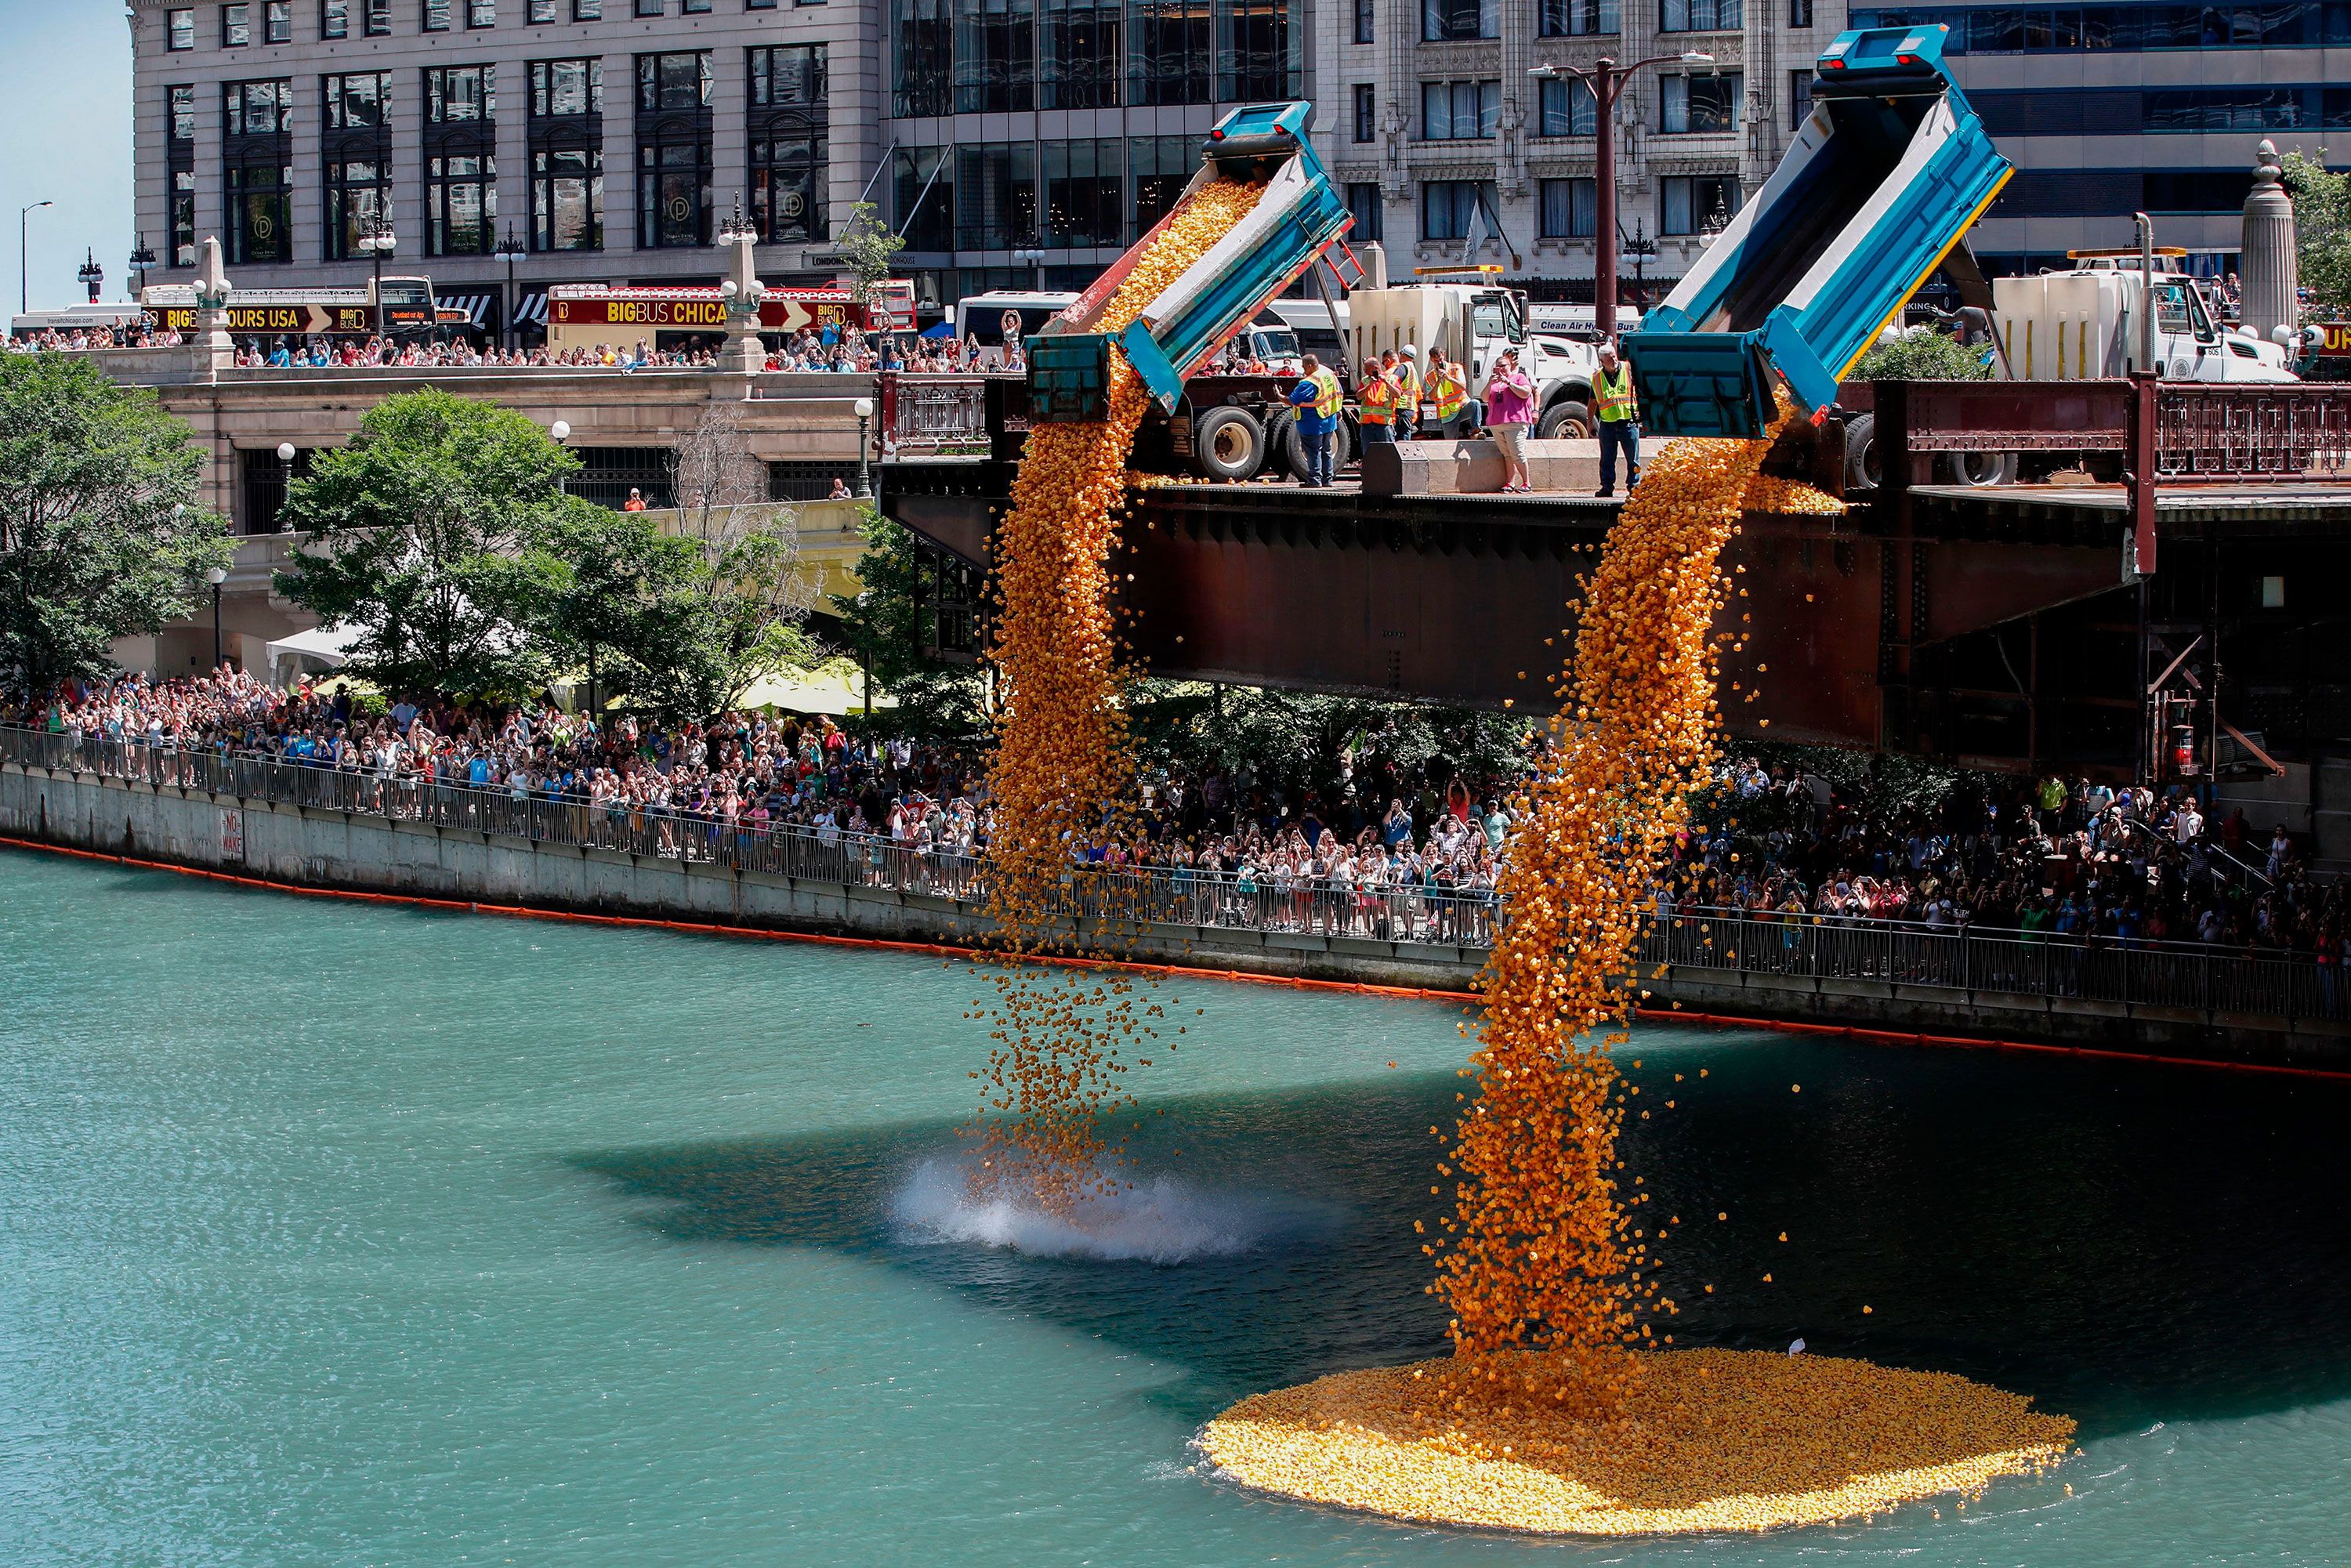 isolatie schoenen Balling Over 63,000 rubber ducks were dumped into the Chicago River for charity |  CNN